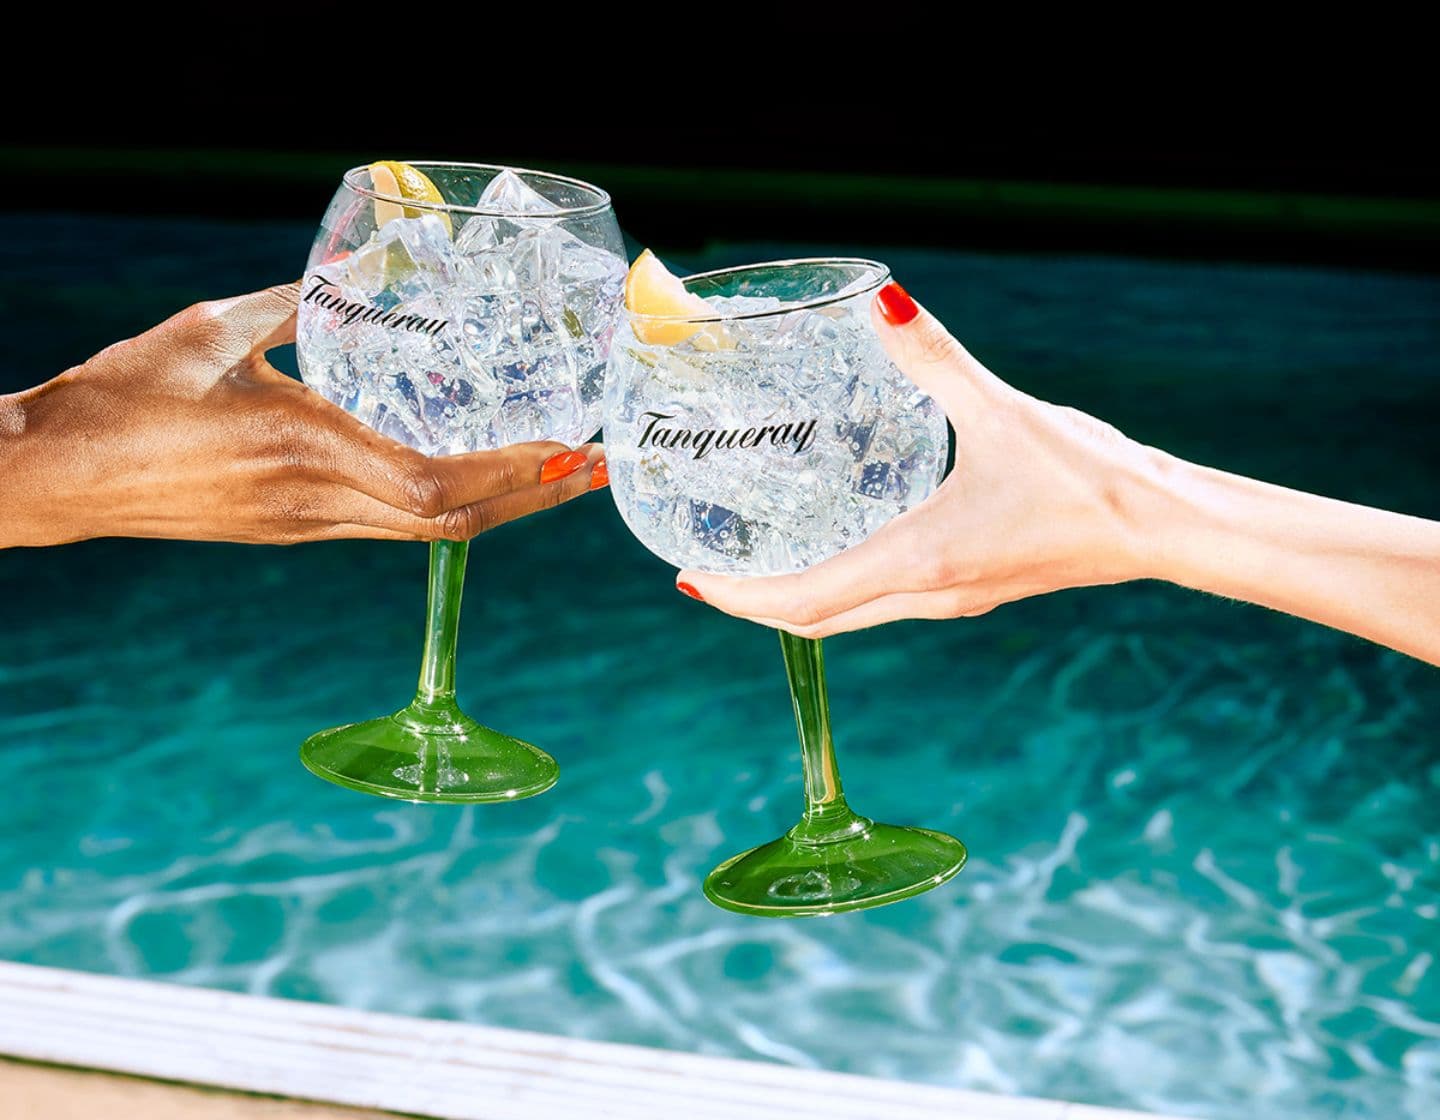 Two people clinking their Tanqueray gin goblets together in front of a pool.